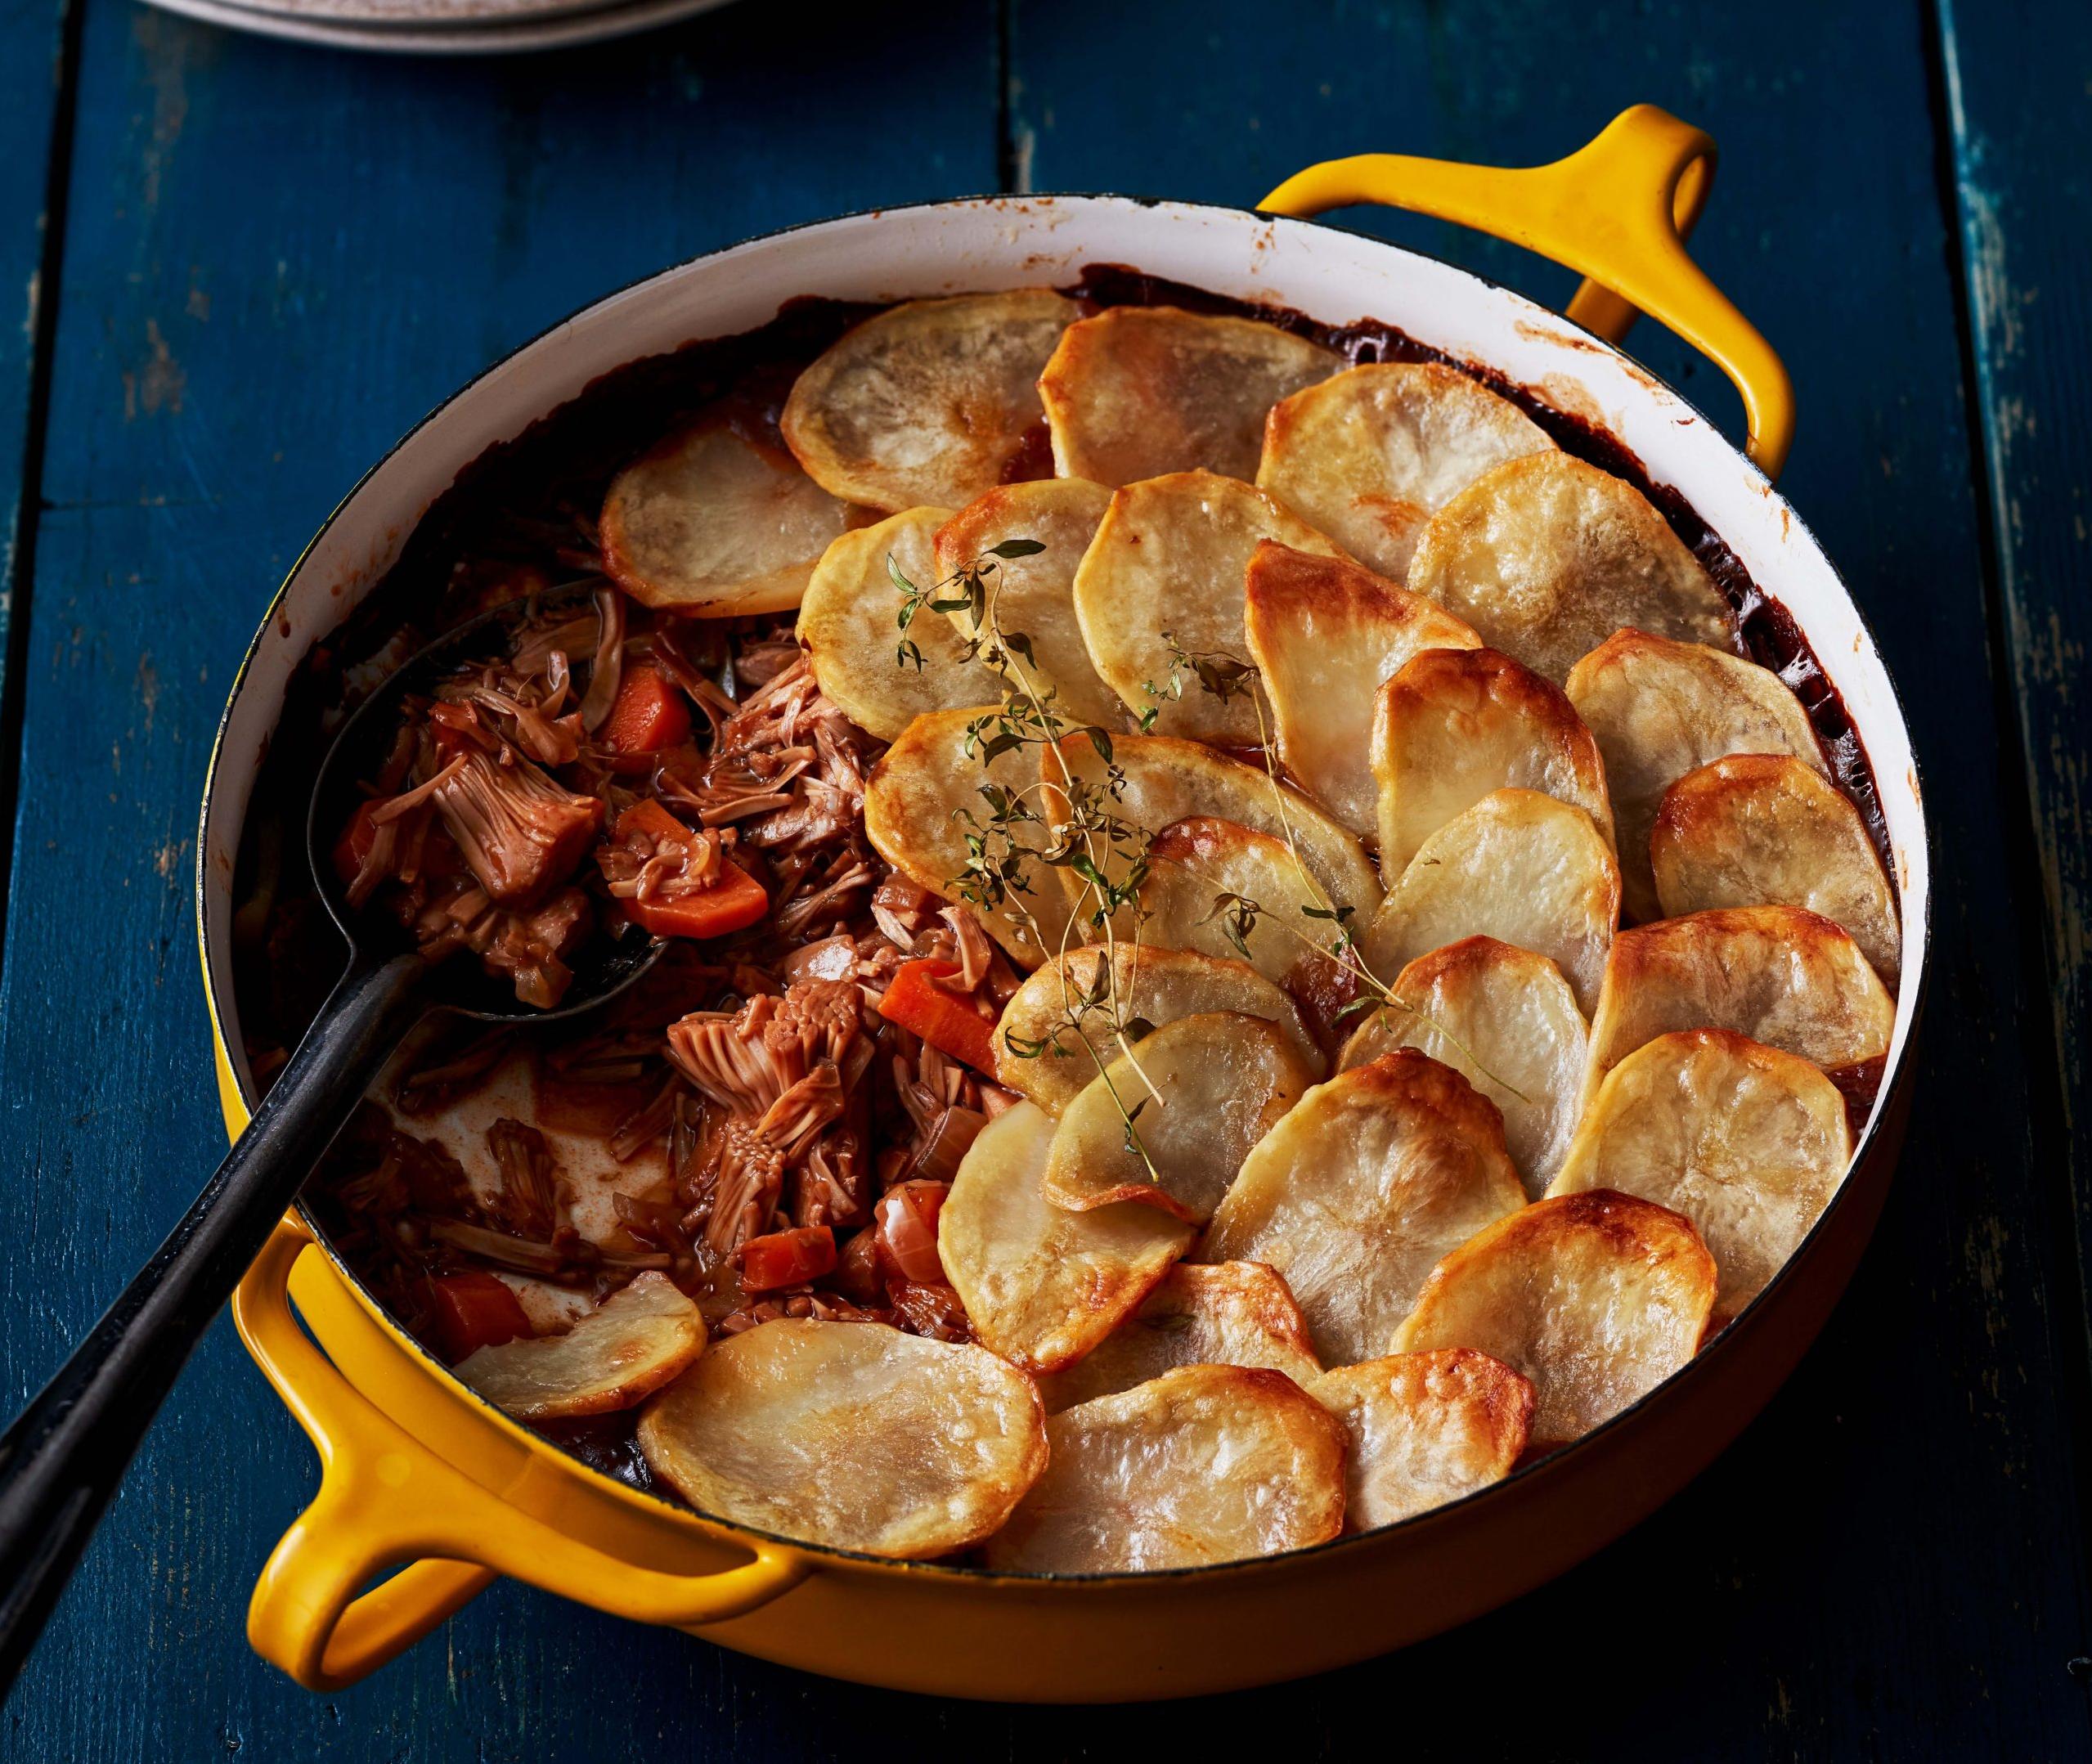  A hearty one-pot wonder, this hotpot is easy to make and even easier to devour.